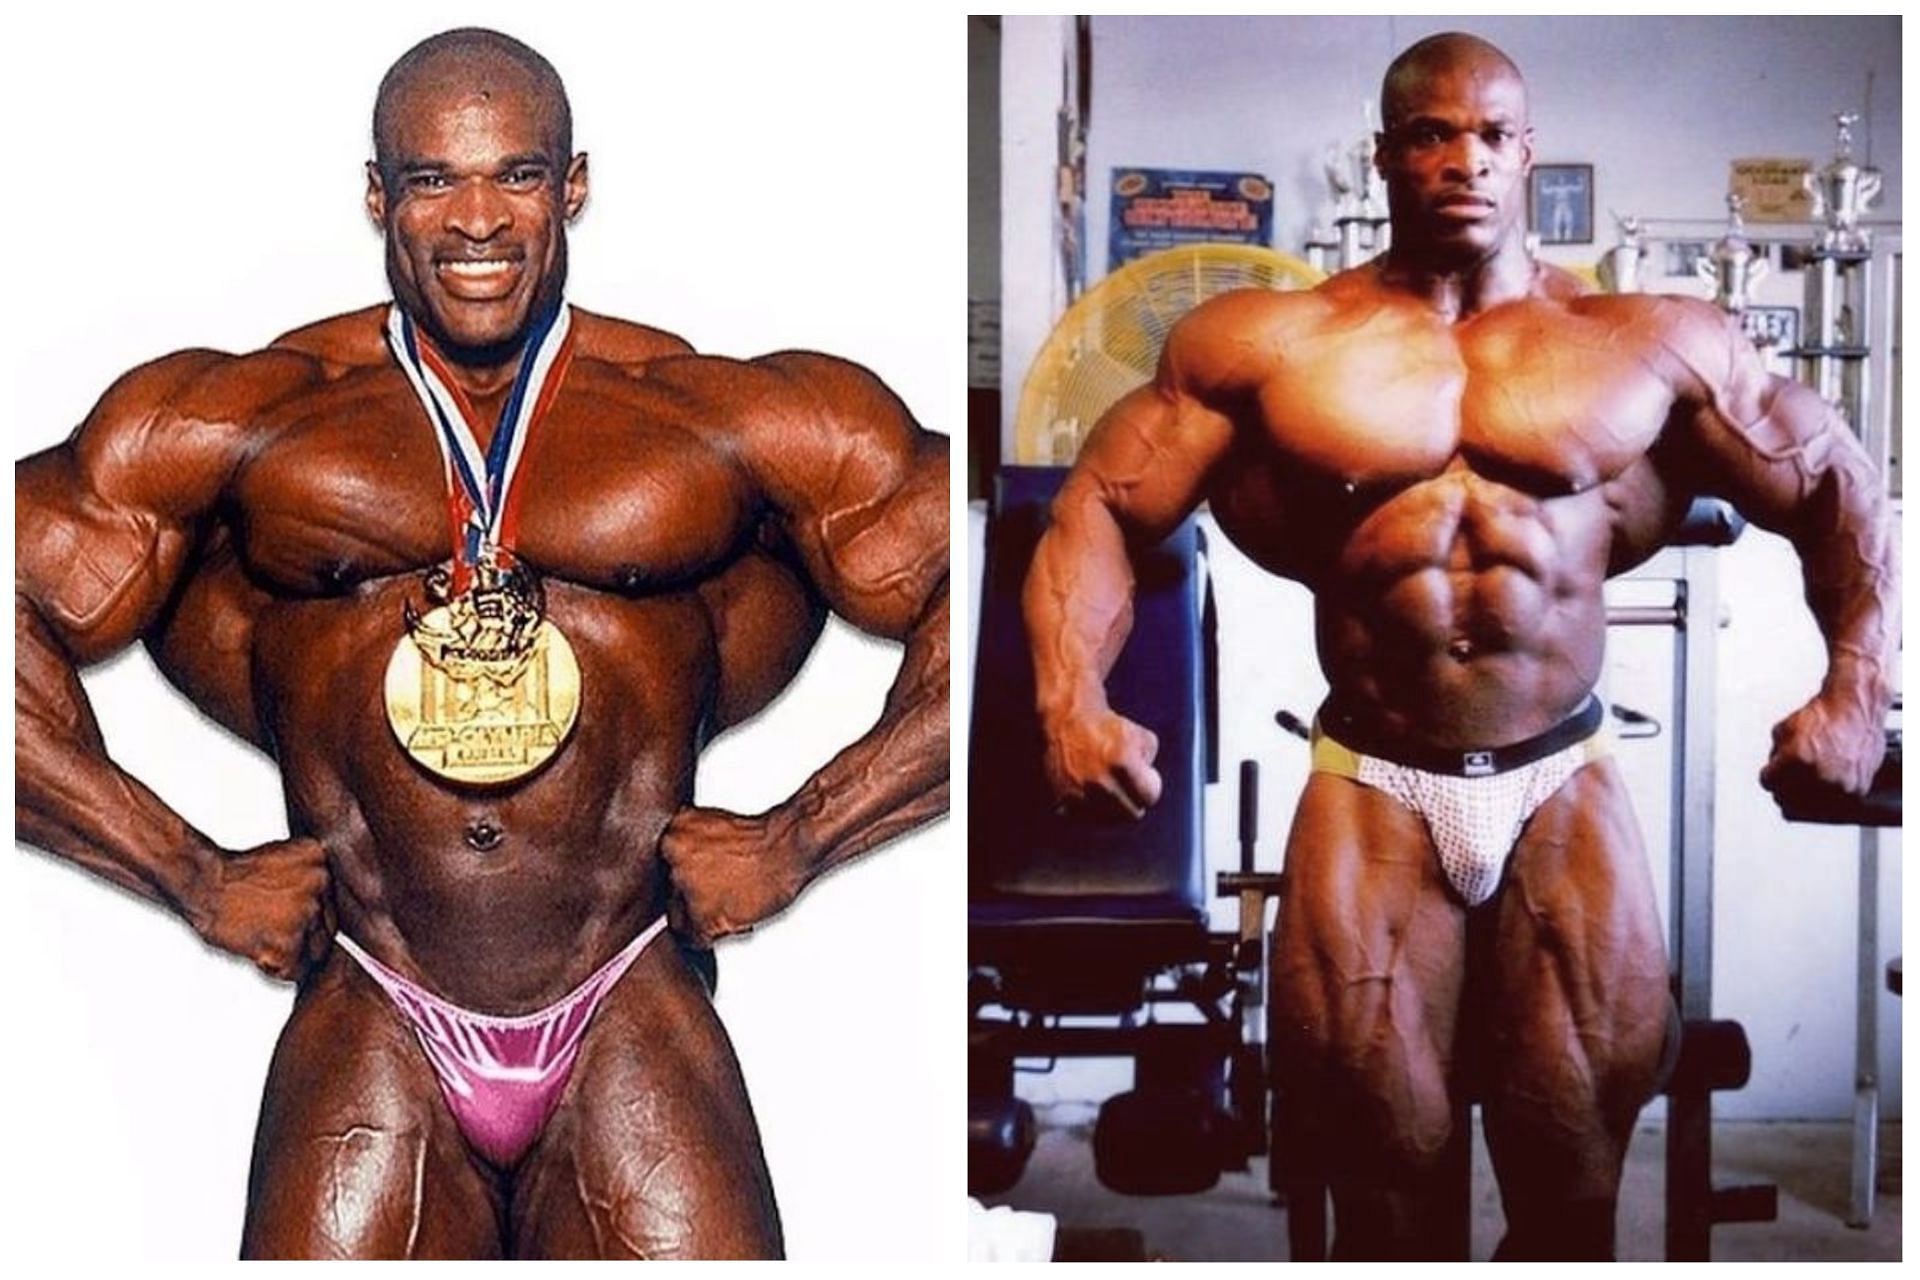 What Was Ronnie Coleman's Workout Split? - SET FOR SET